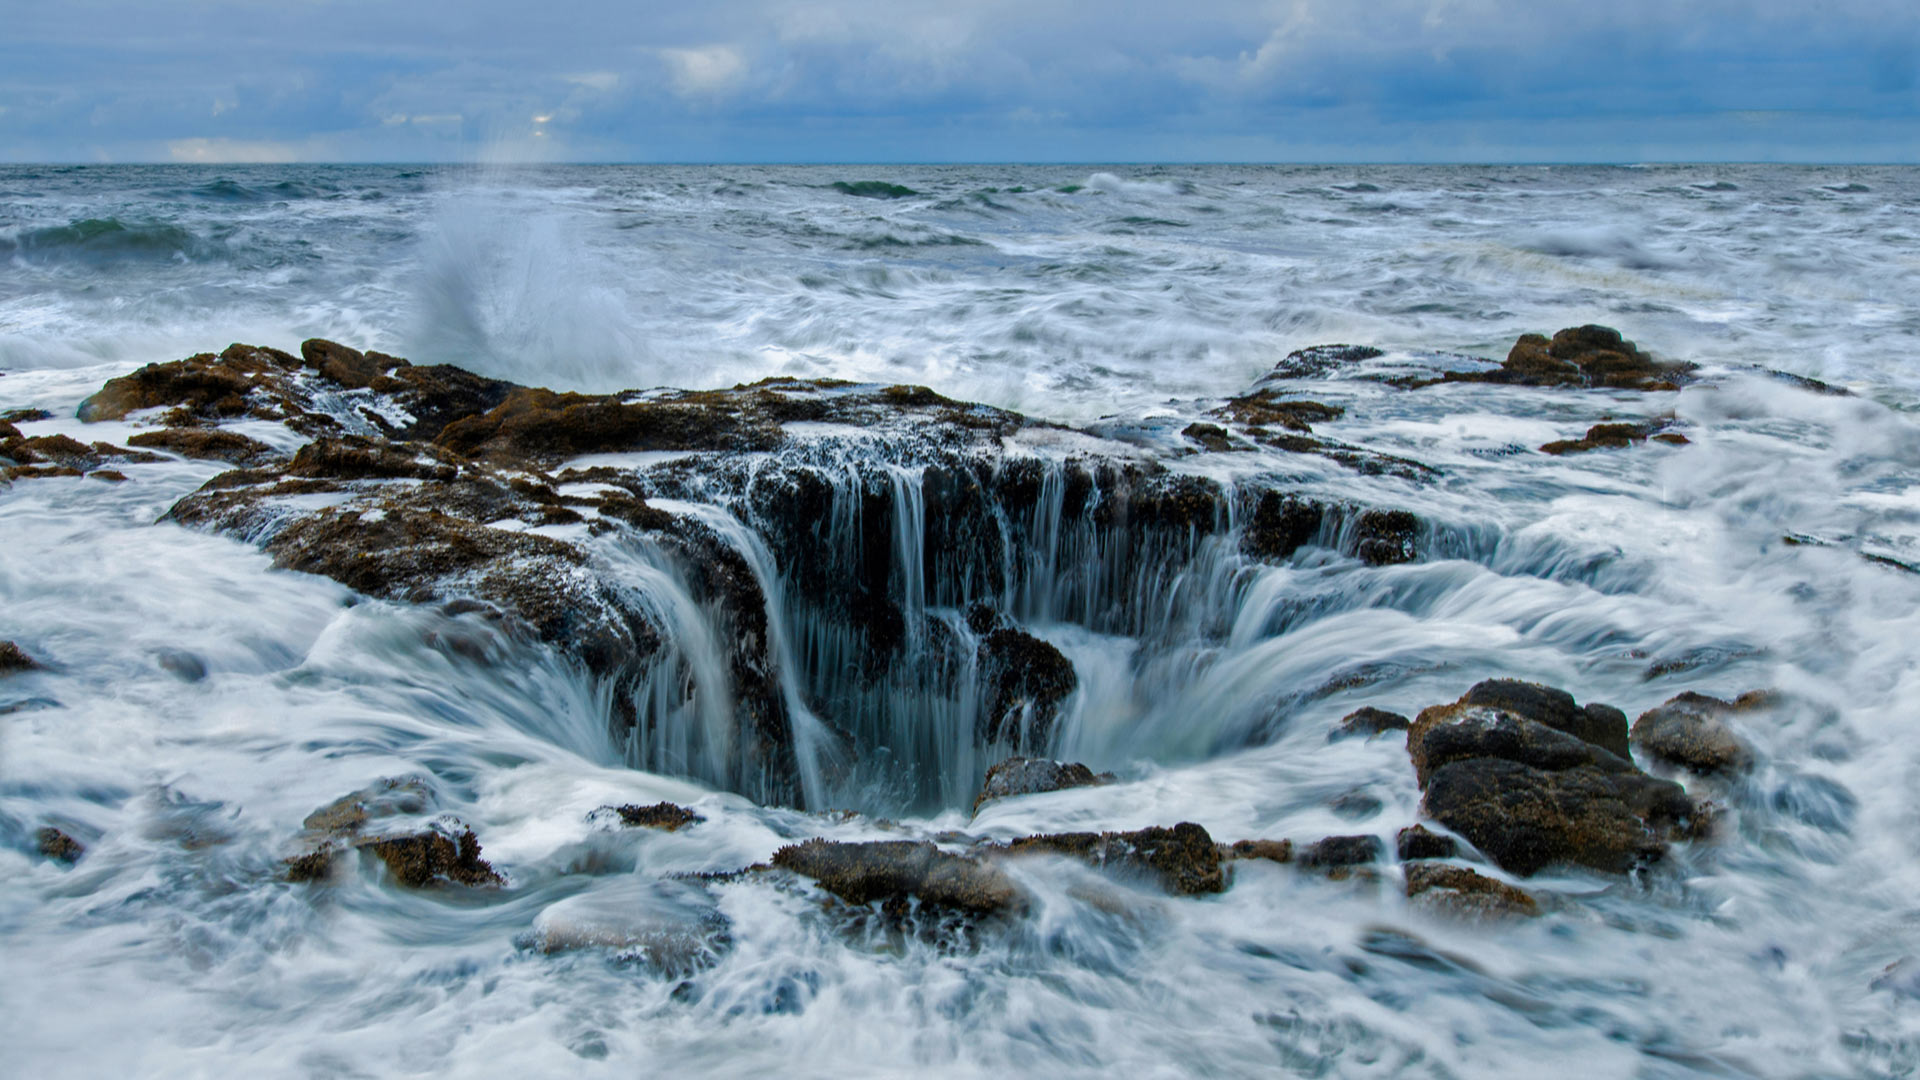 Thor's Well at Cape Perpetua on the Oregon coast - Cavan Images/Offset by Shutterstock)